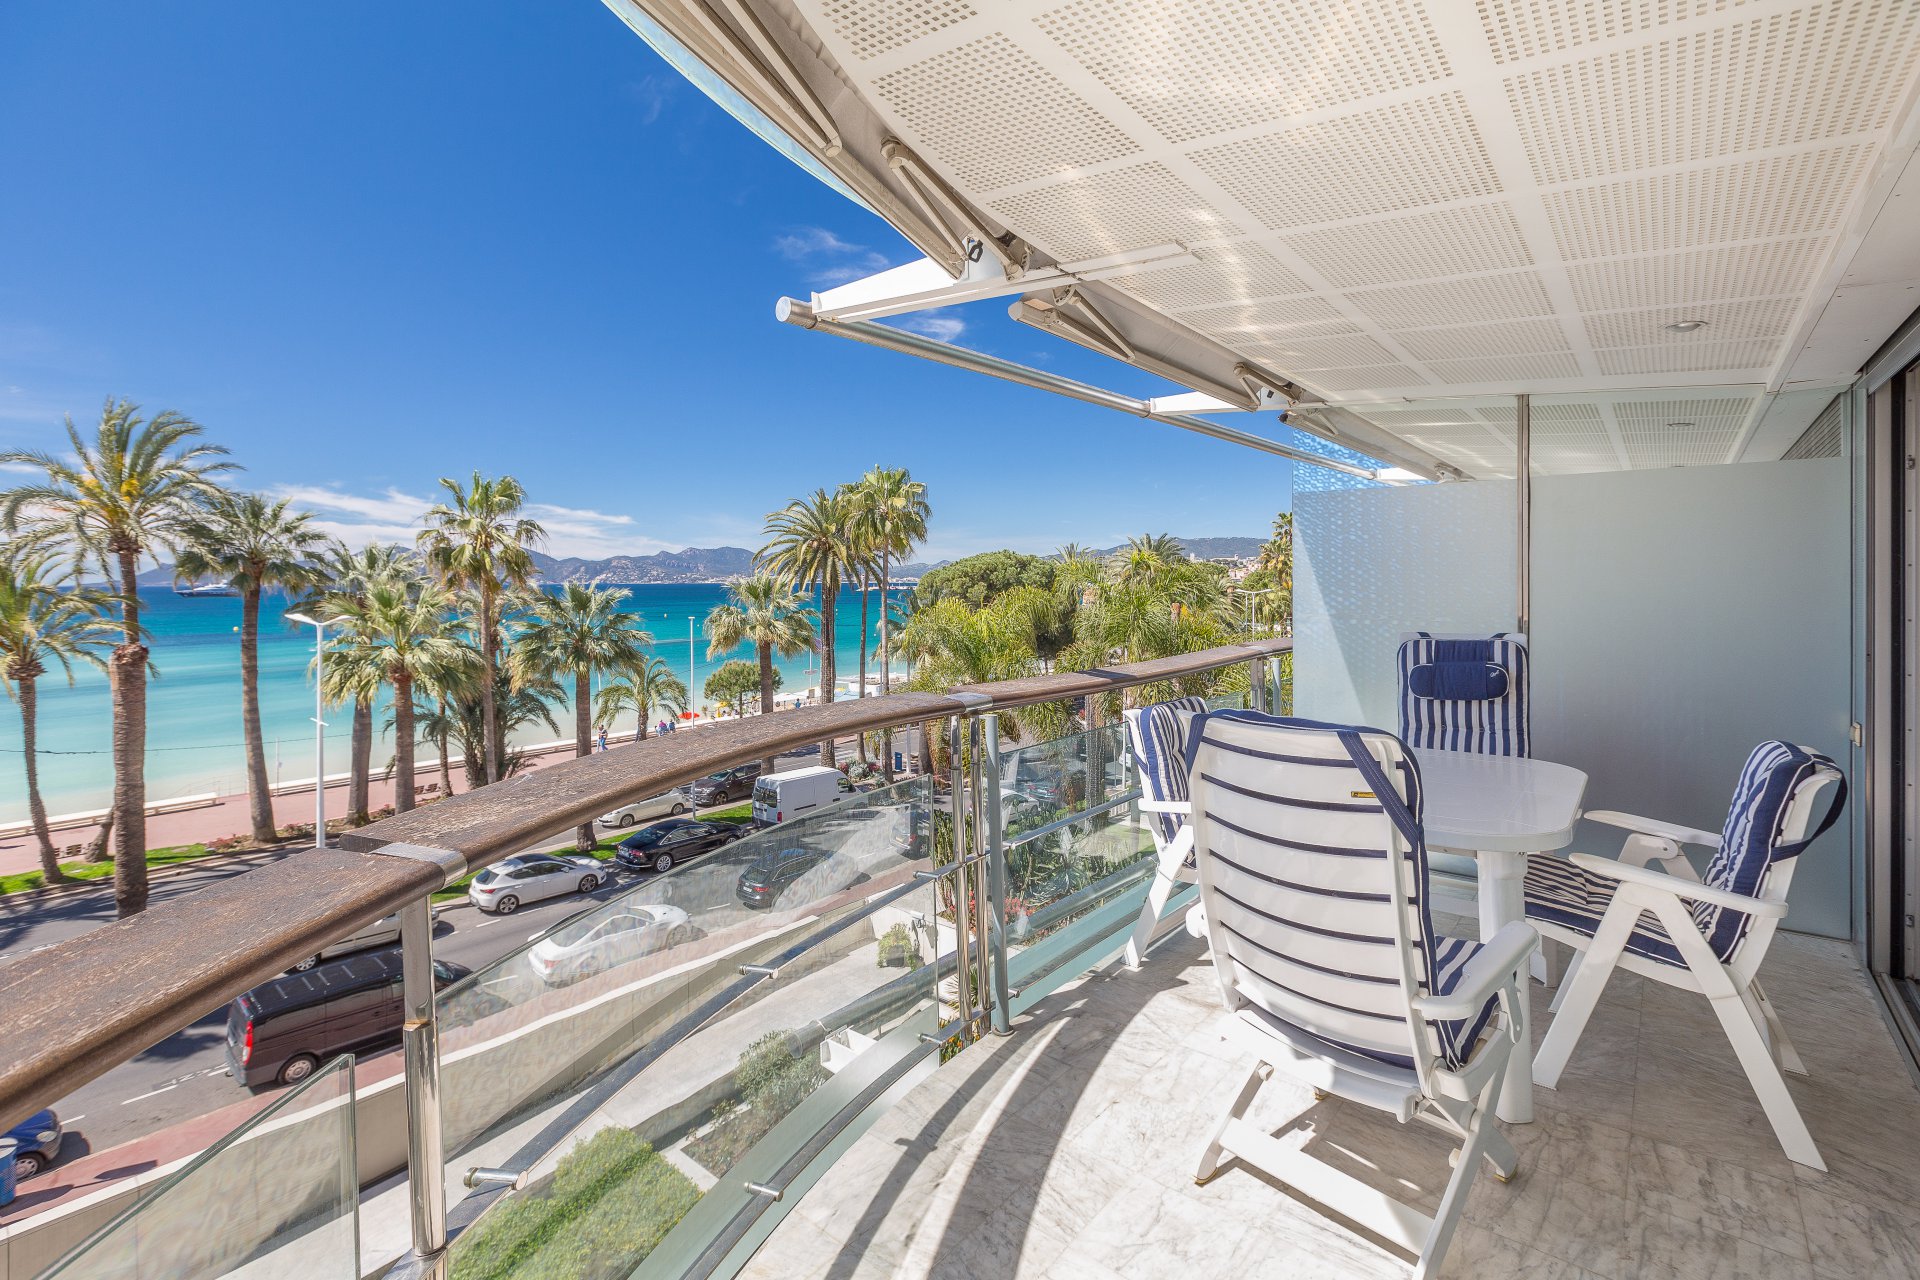  Cannes Palm Beach Apartment For Sale for Simple Design